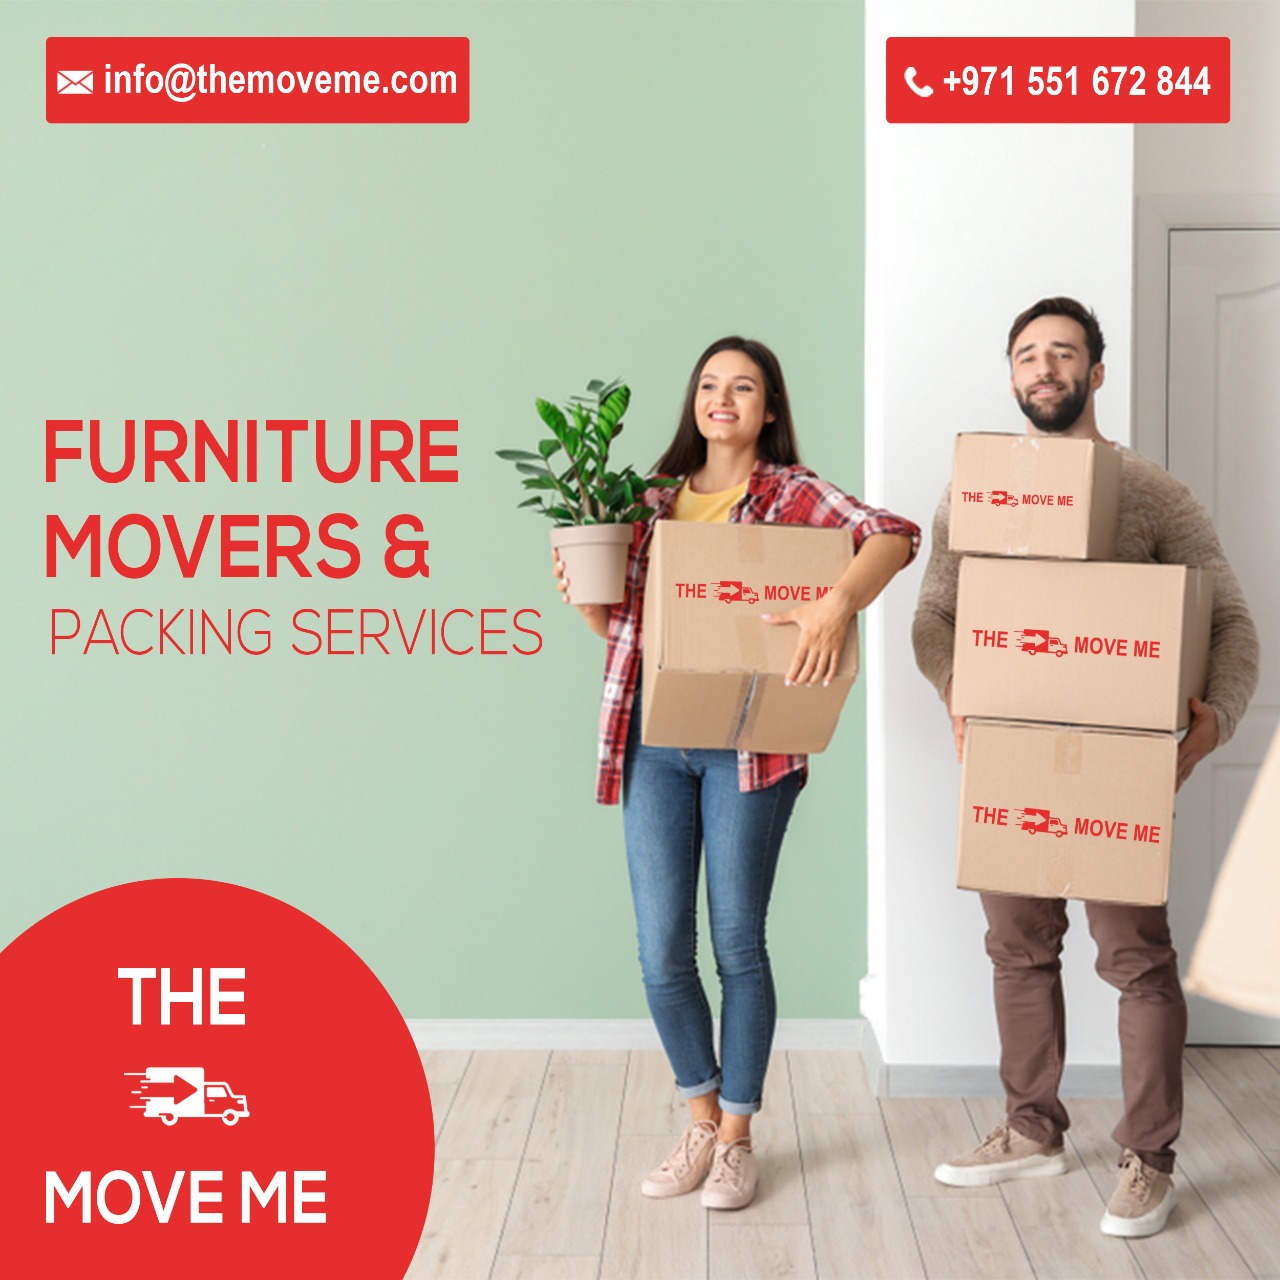 2 The Move Me Movers.jpeg